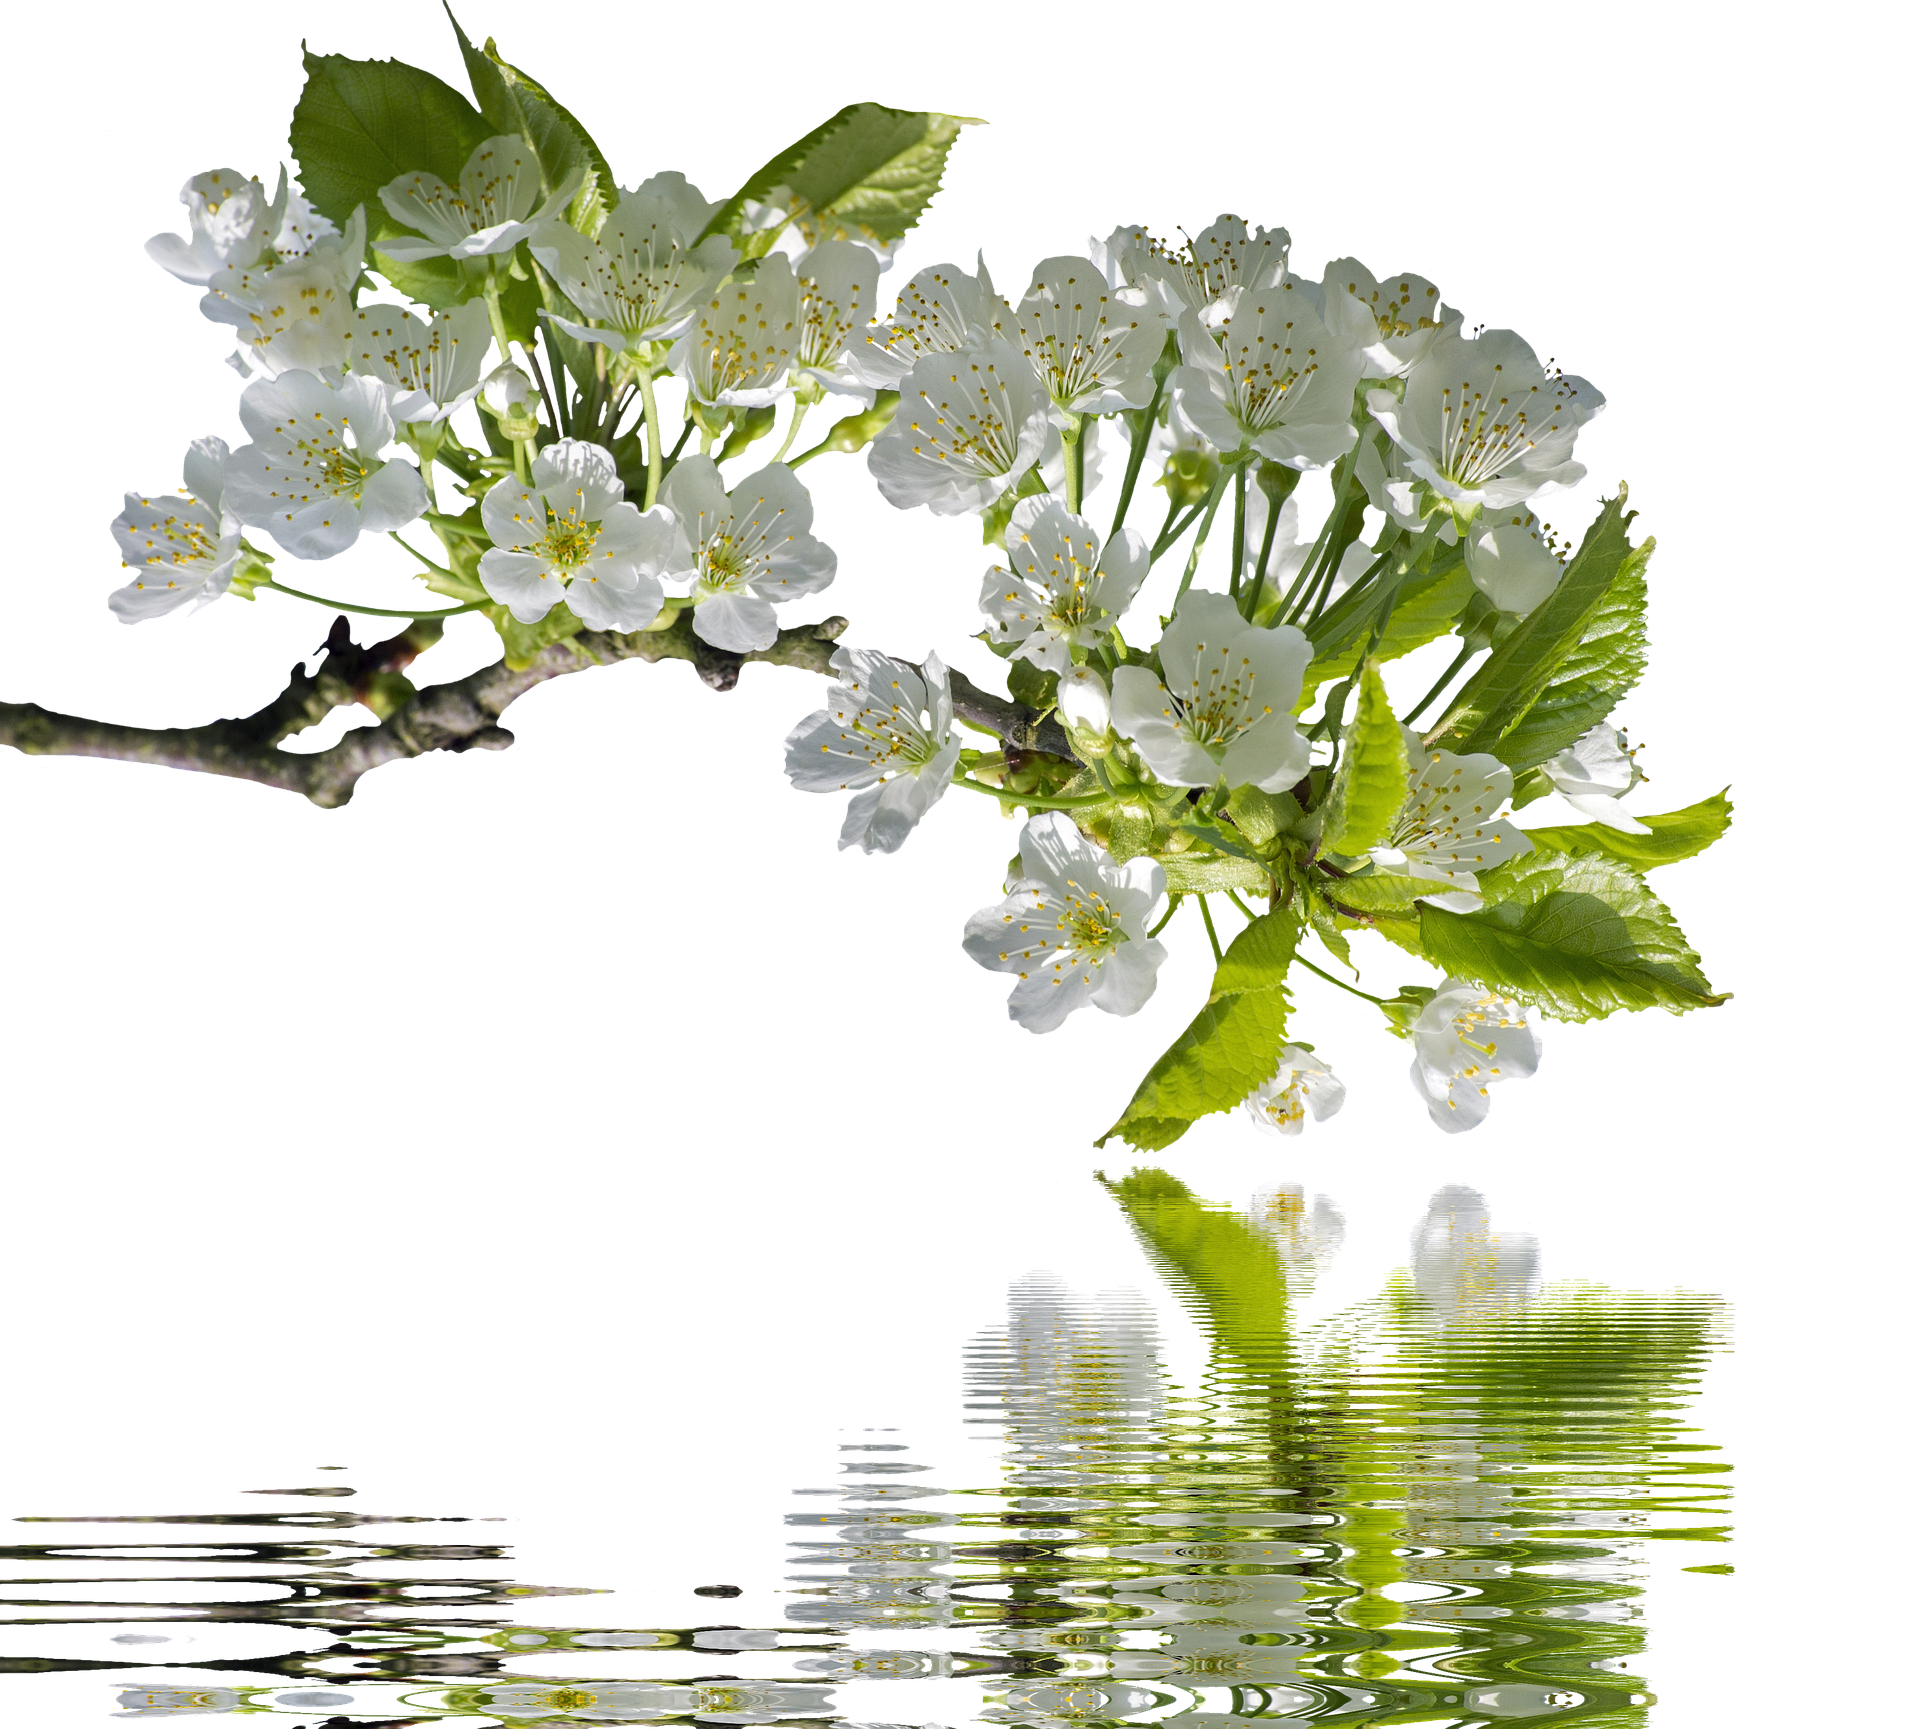 A White Flowers On A Branch